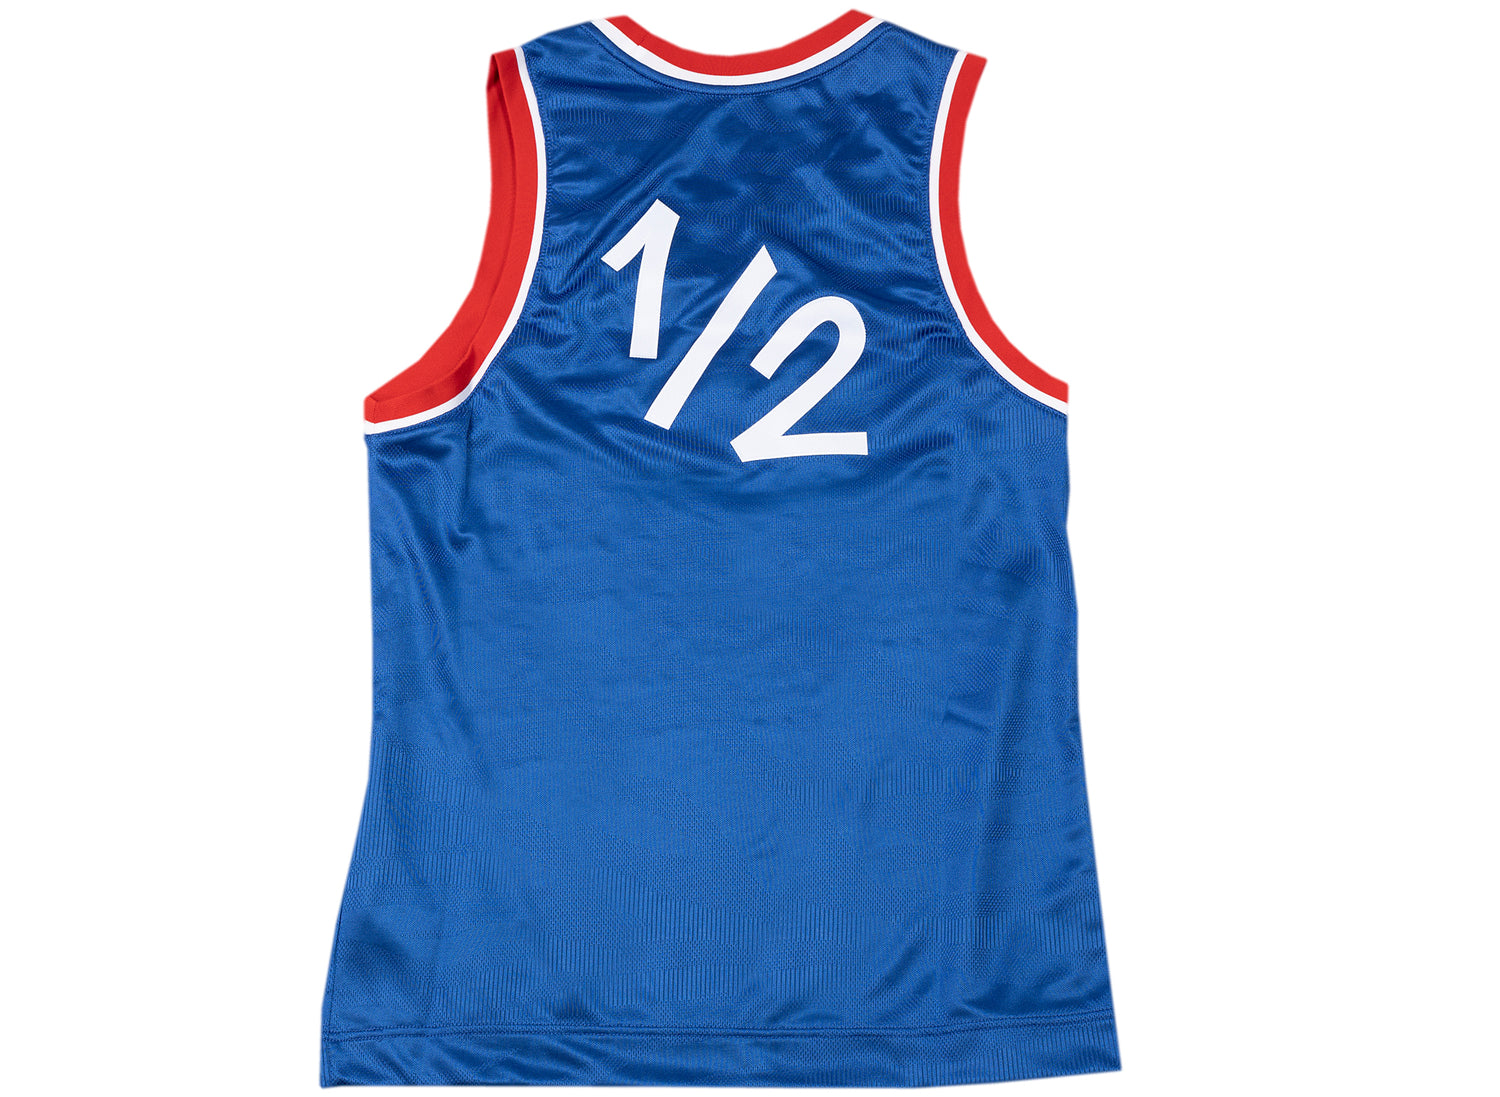 sixers jersey nike